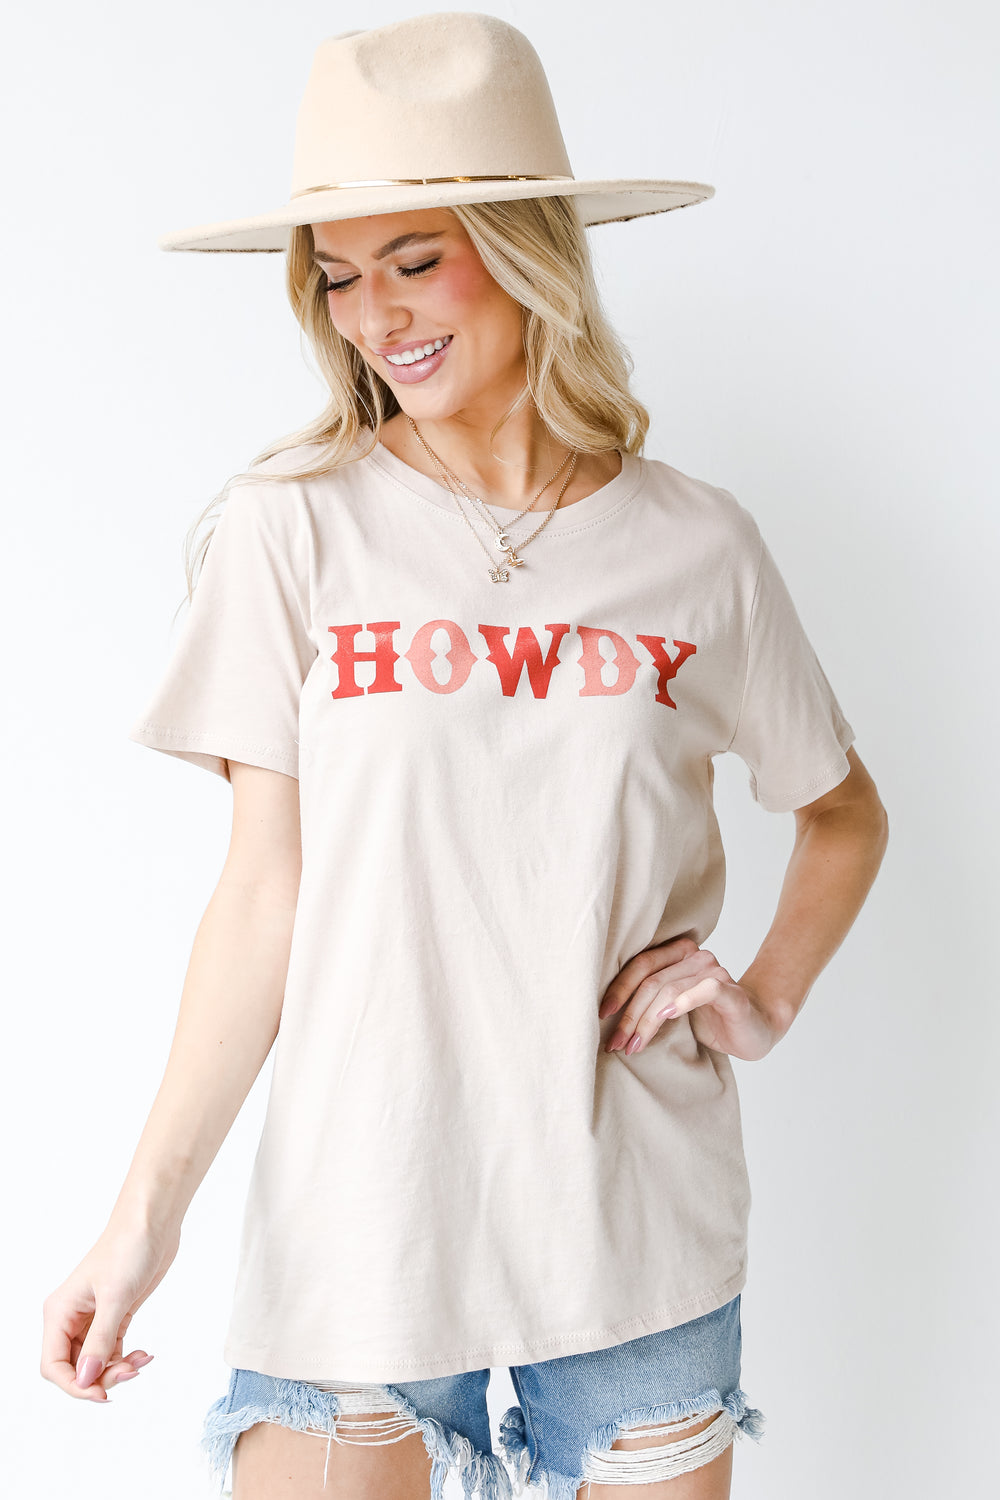 Howdy Oversized Graphic Tee from dress up